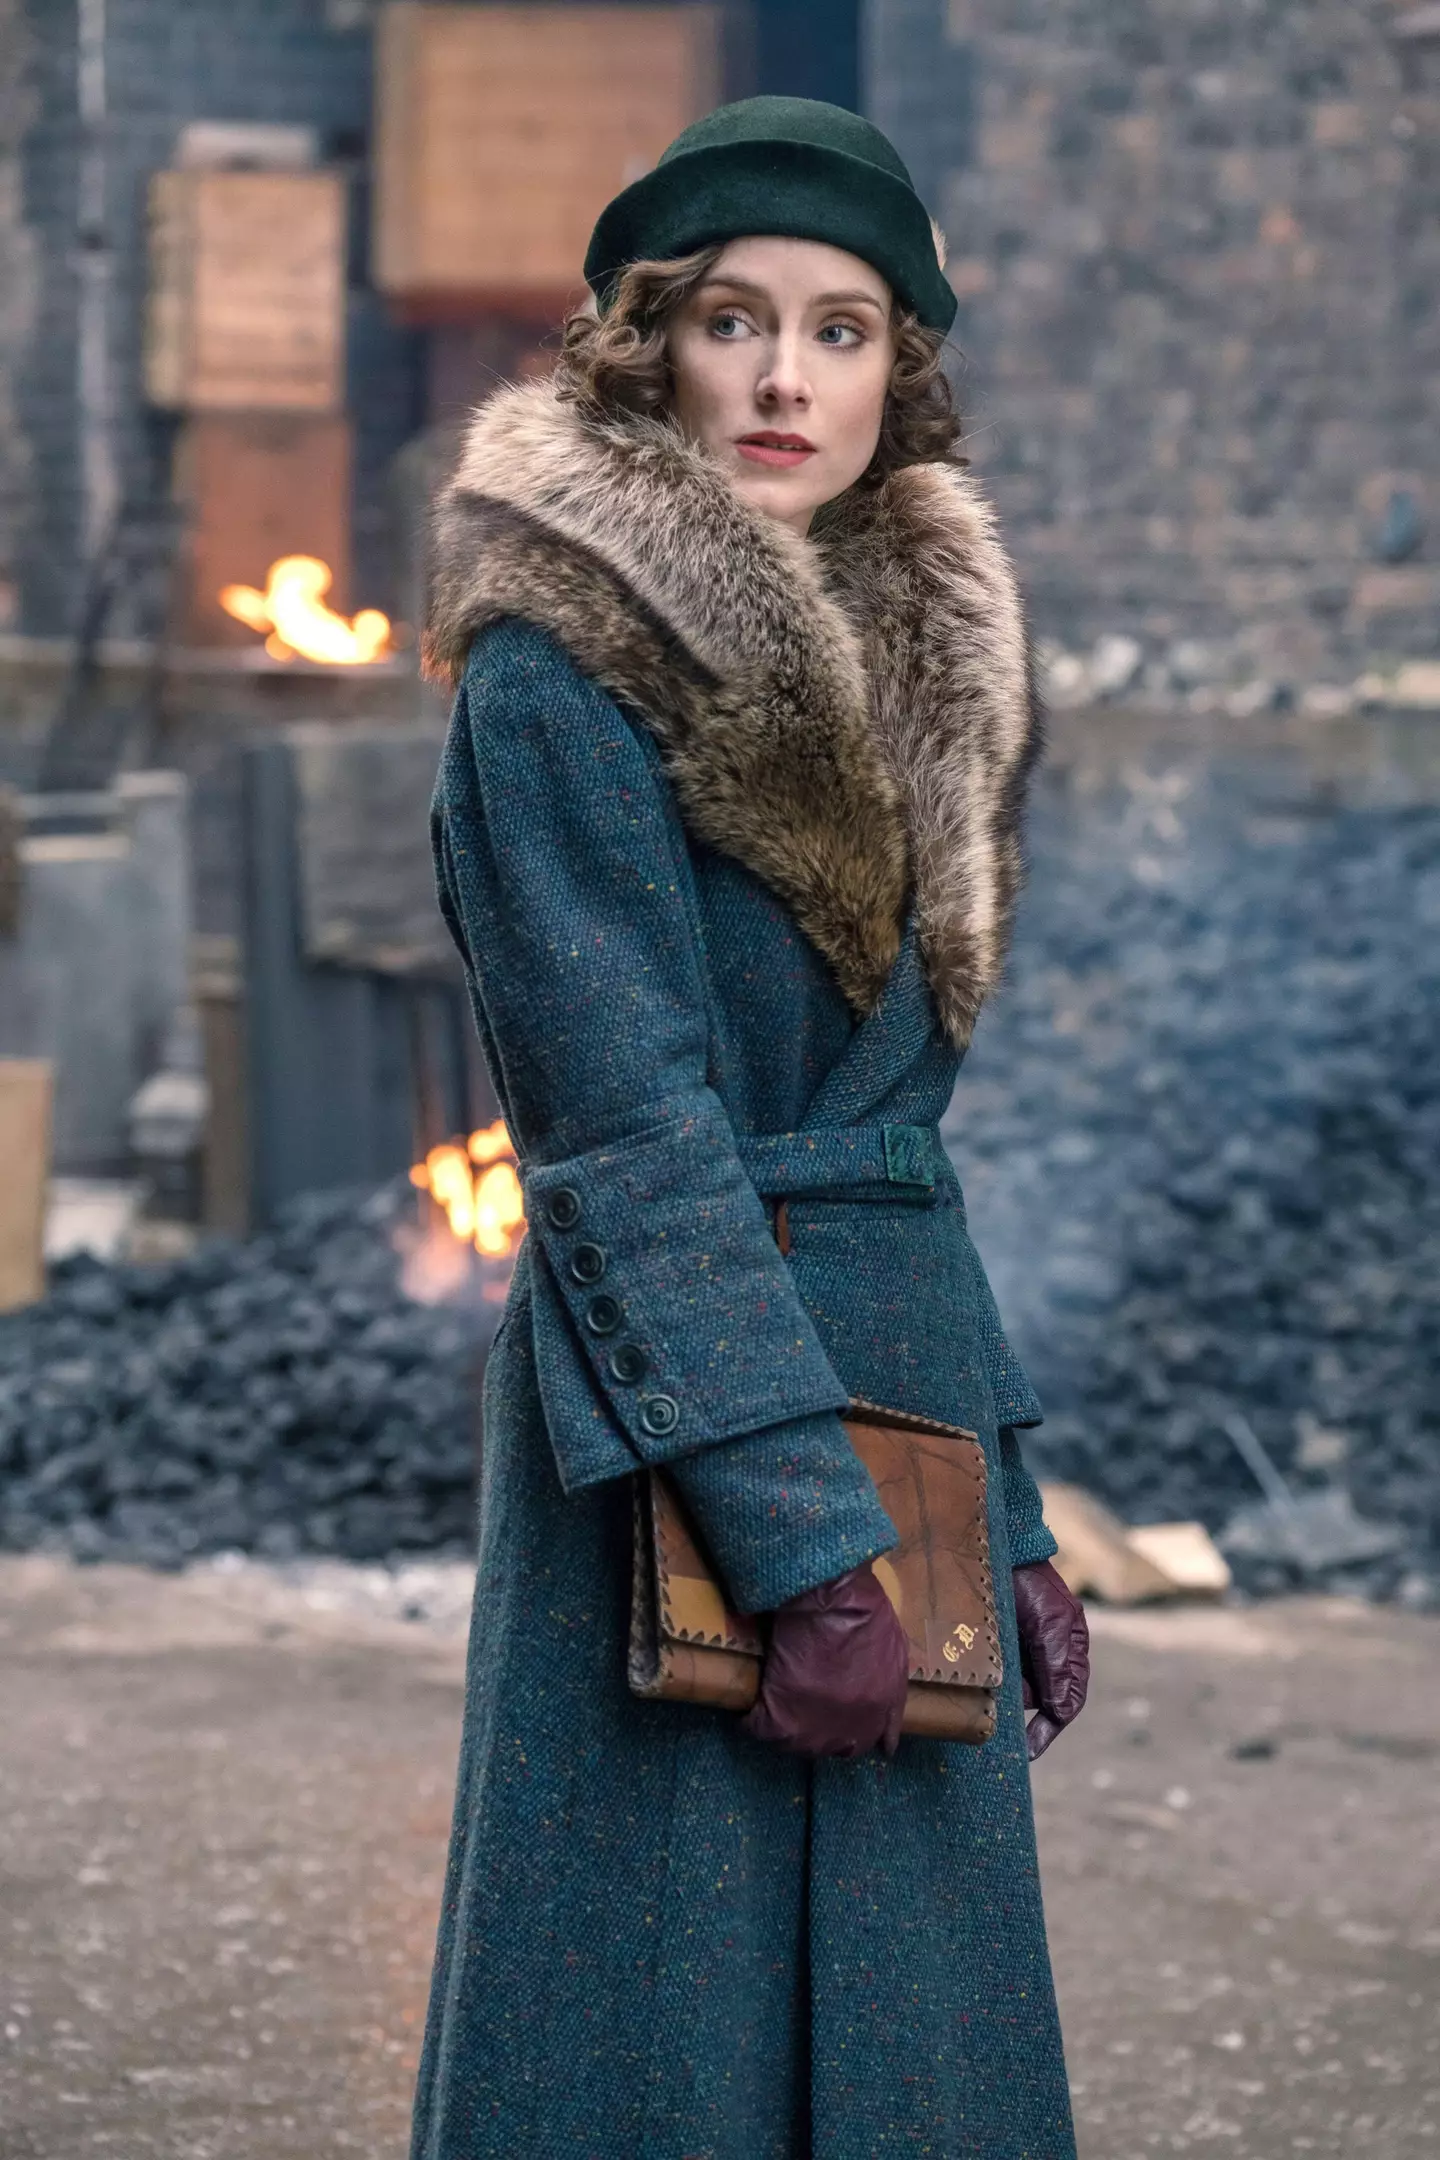 For the final season, the team decided that Ada will wear some of Aunt Polly's clothes (